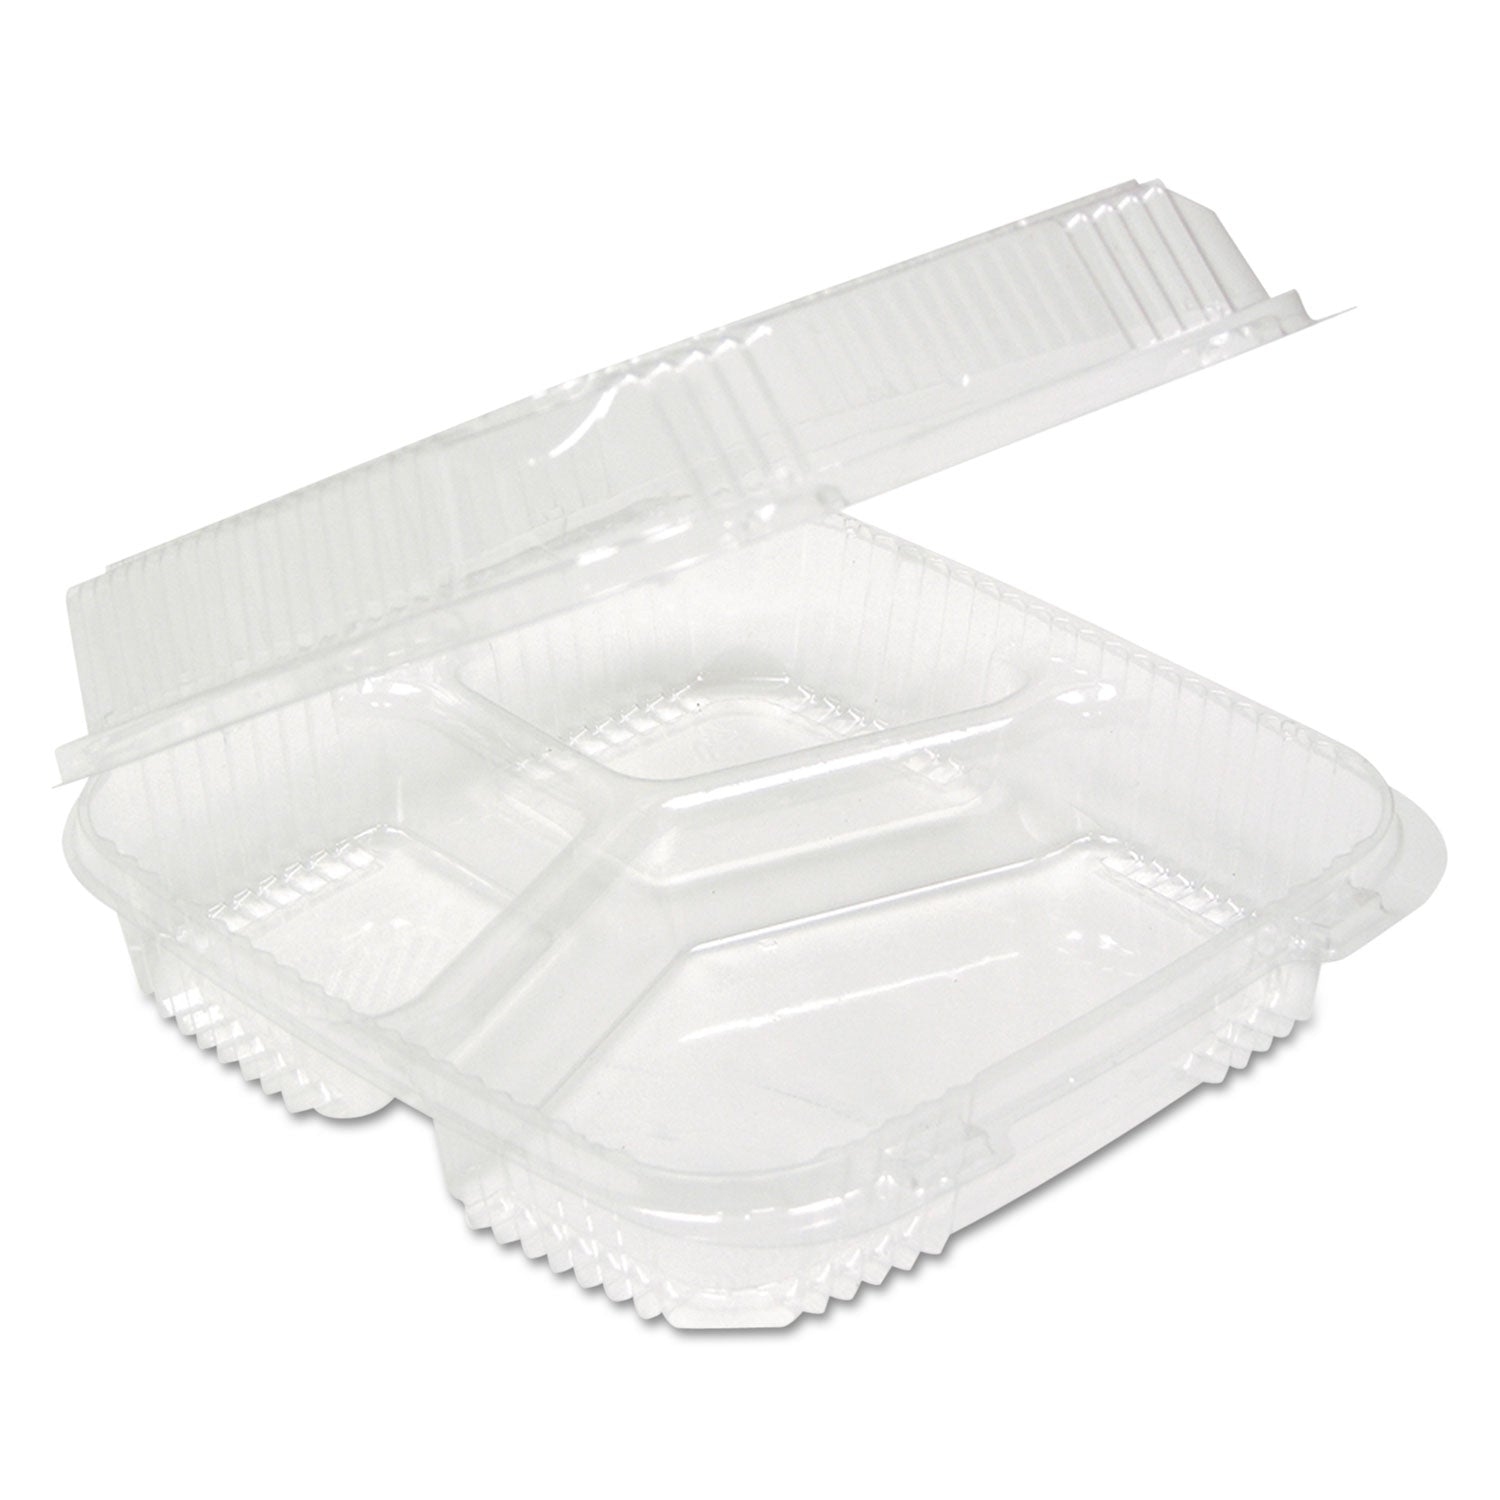 clearview-smartlock-hinged-lid-container-3-compartment-5-oz-14-oz-82-x-834-x-291-clear-plastic-200-carton_pctyci81123 - 2